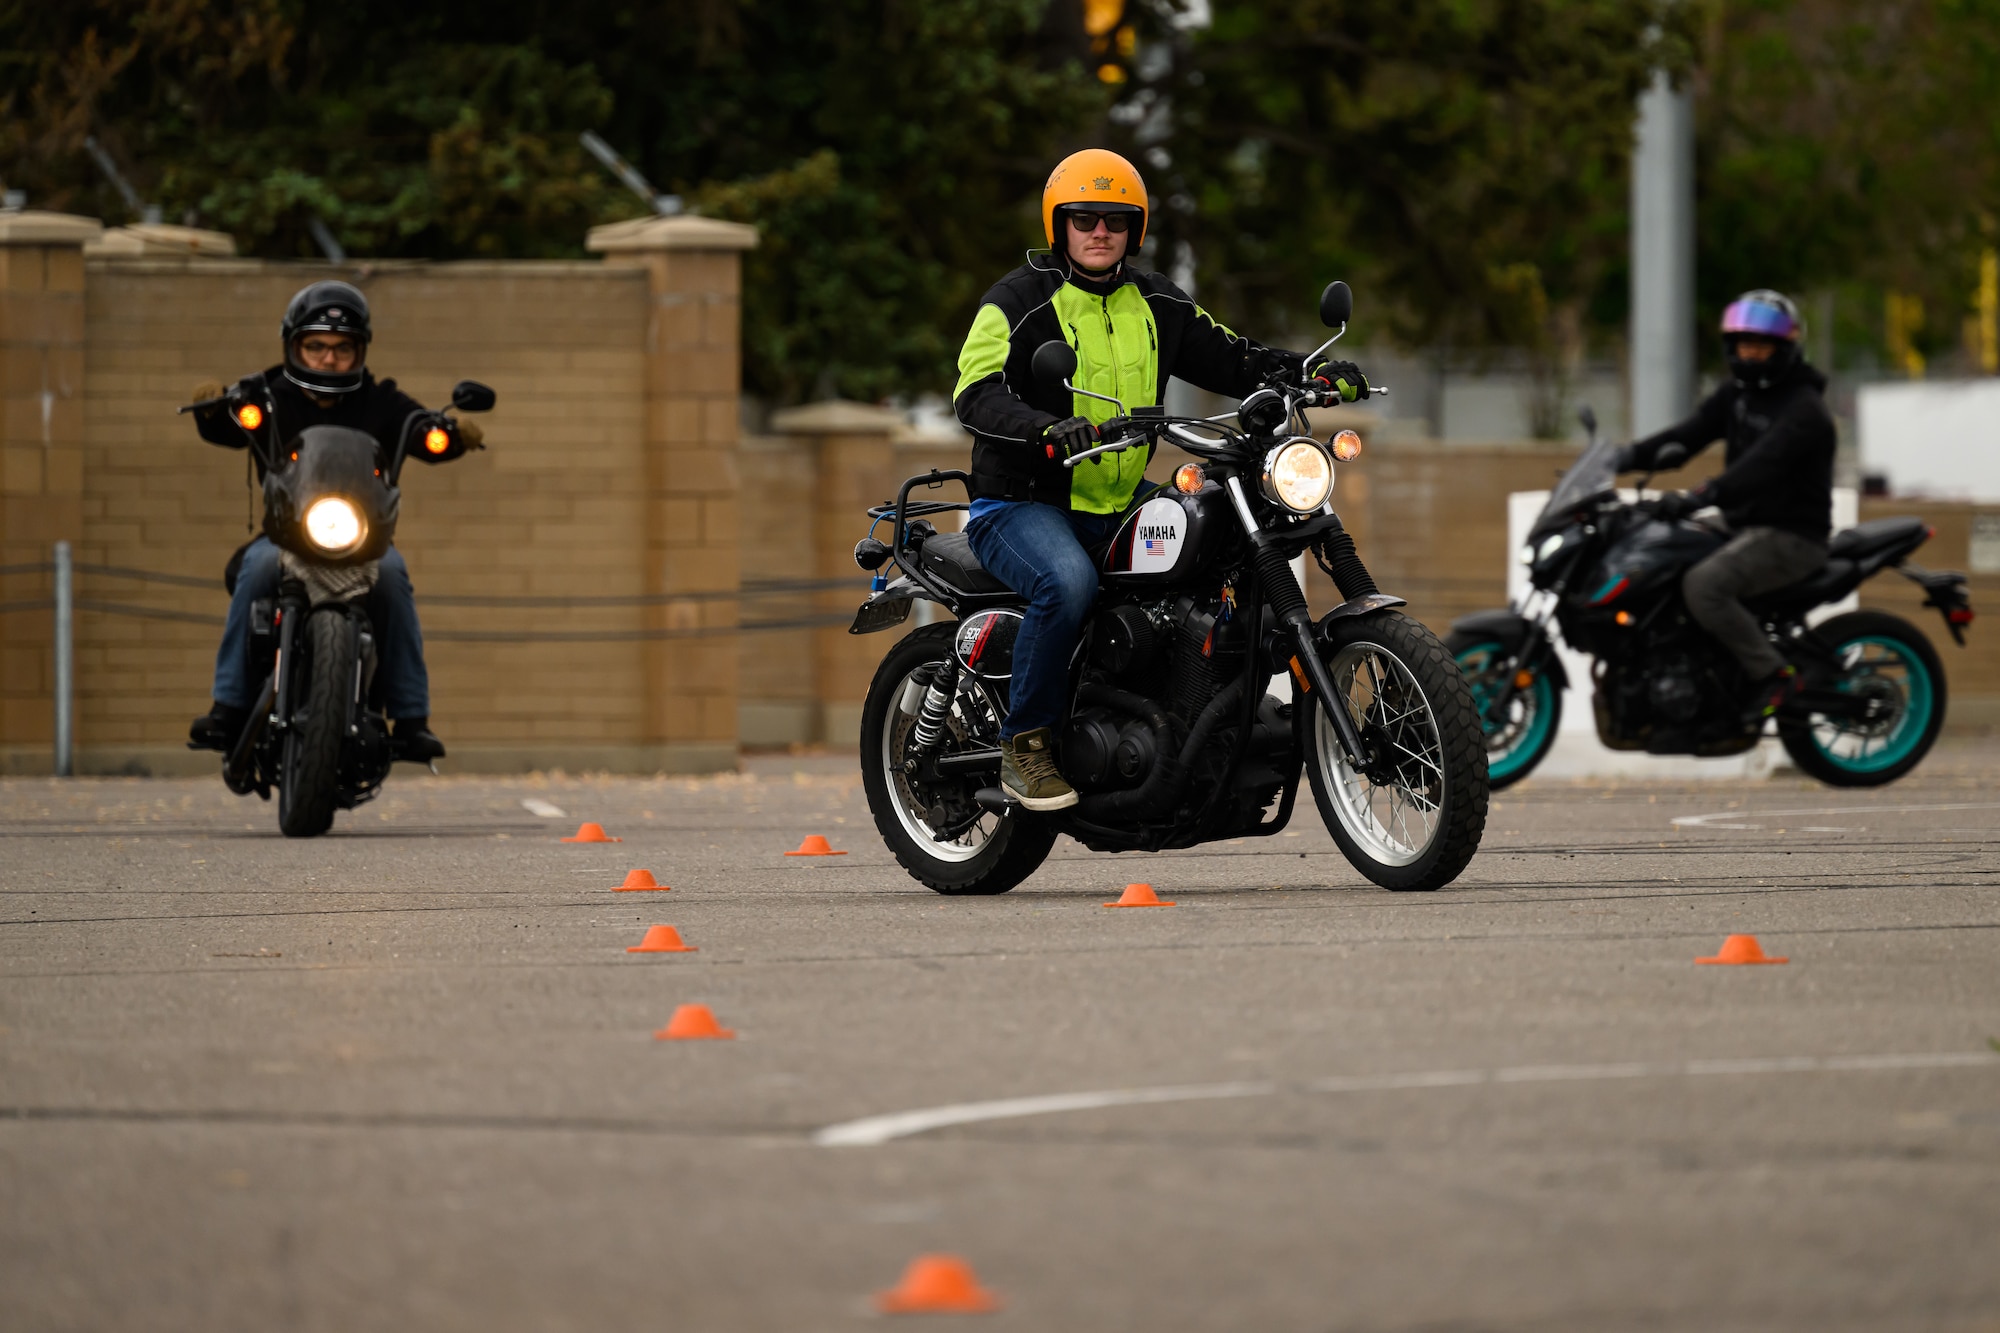 Motorcyclists refine maneuvering skills during a Basic Rider Course at Hill Air Force Base, Utah, May 26, 2023. The 75th Air Base Wing safety office maintains a SharePoint that provides motorcyclists with information and resources regarding safety, requirements and training for anyone with base access.  (U.S. Air Force photo by R. Nial Bradshaw)